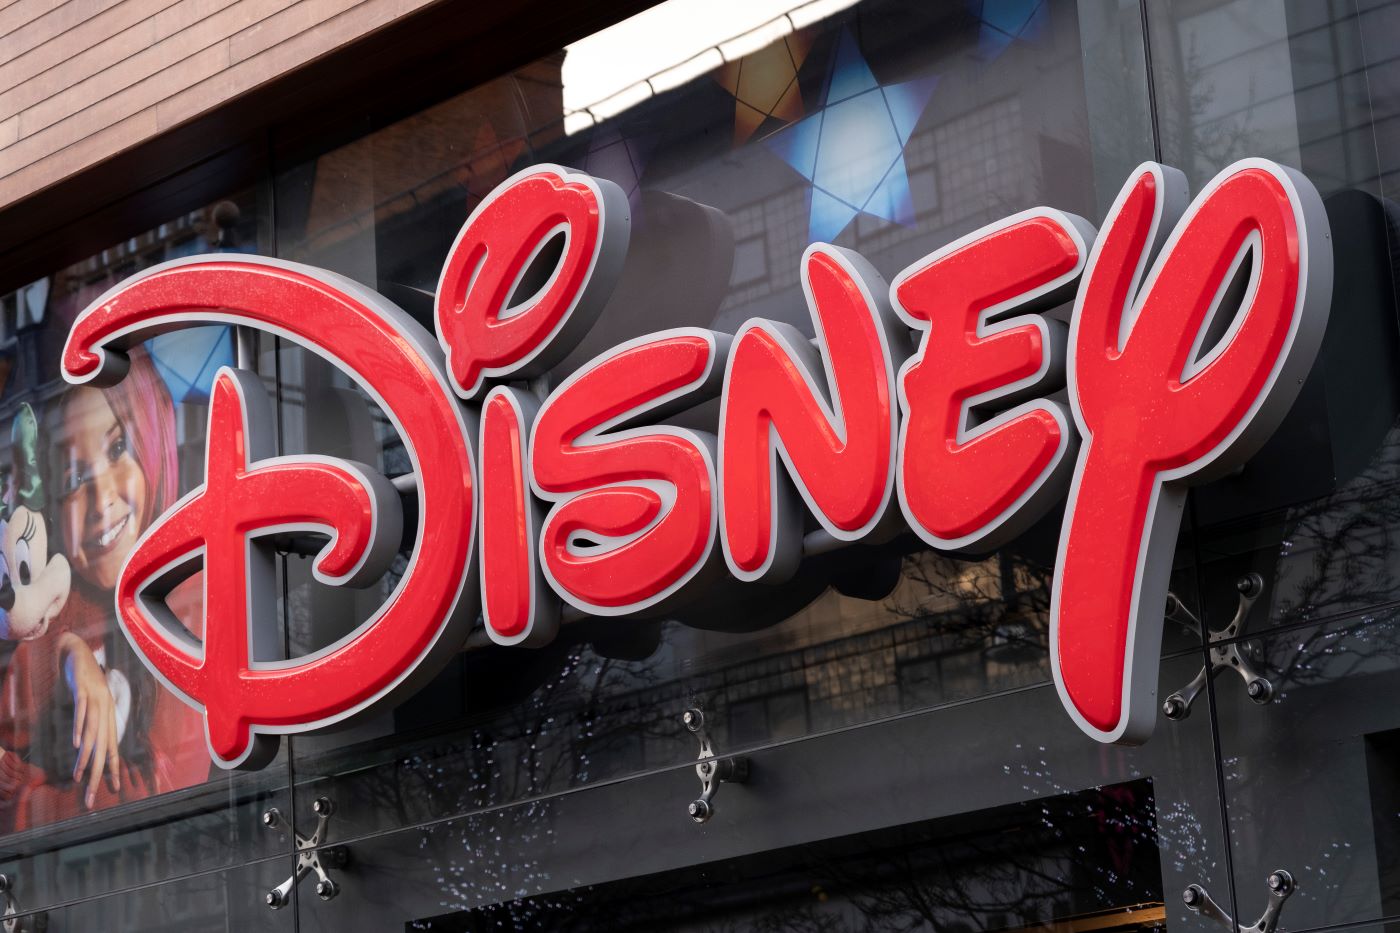 A Disney sign written in red on a black building.